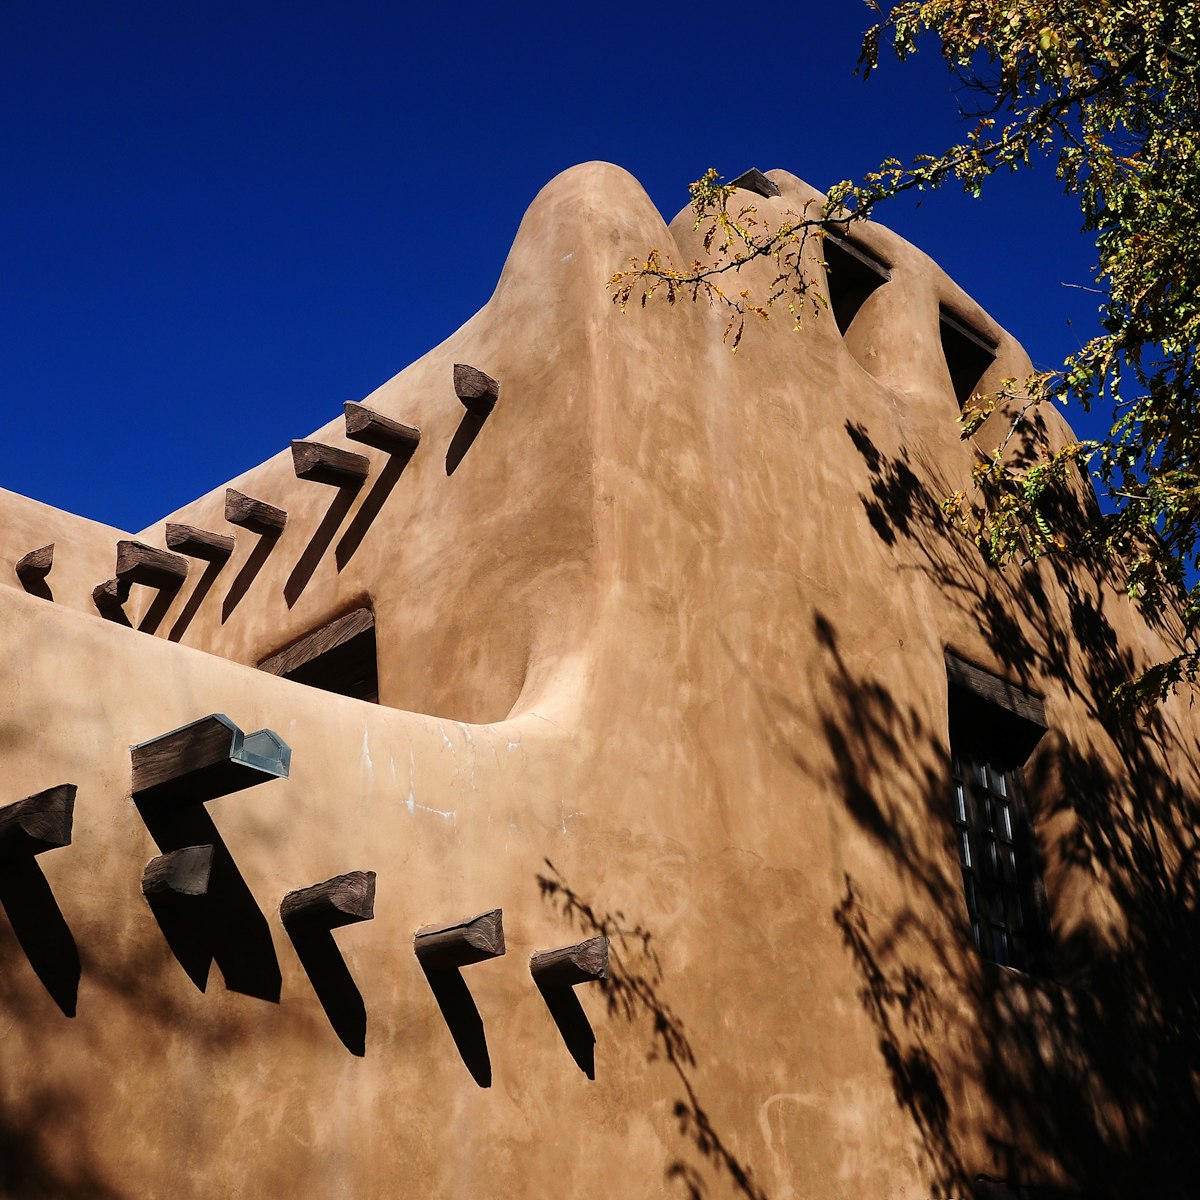 SANTA FE, NM - OCTOBER 20, 2013: An adobe structure on Santa Fe, New Mexico's historic Plaza is home to the New Mexico Museum of Art. (Photo by Robert Alexander/Getty Images)